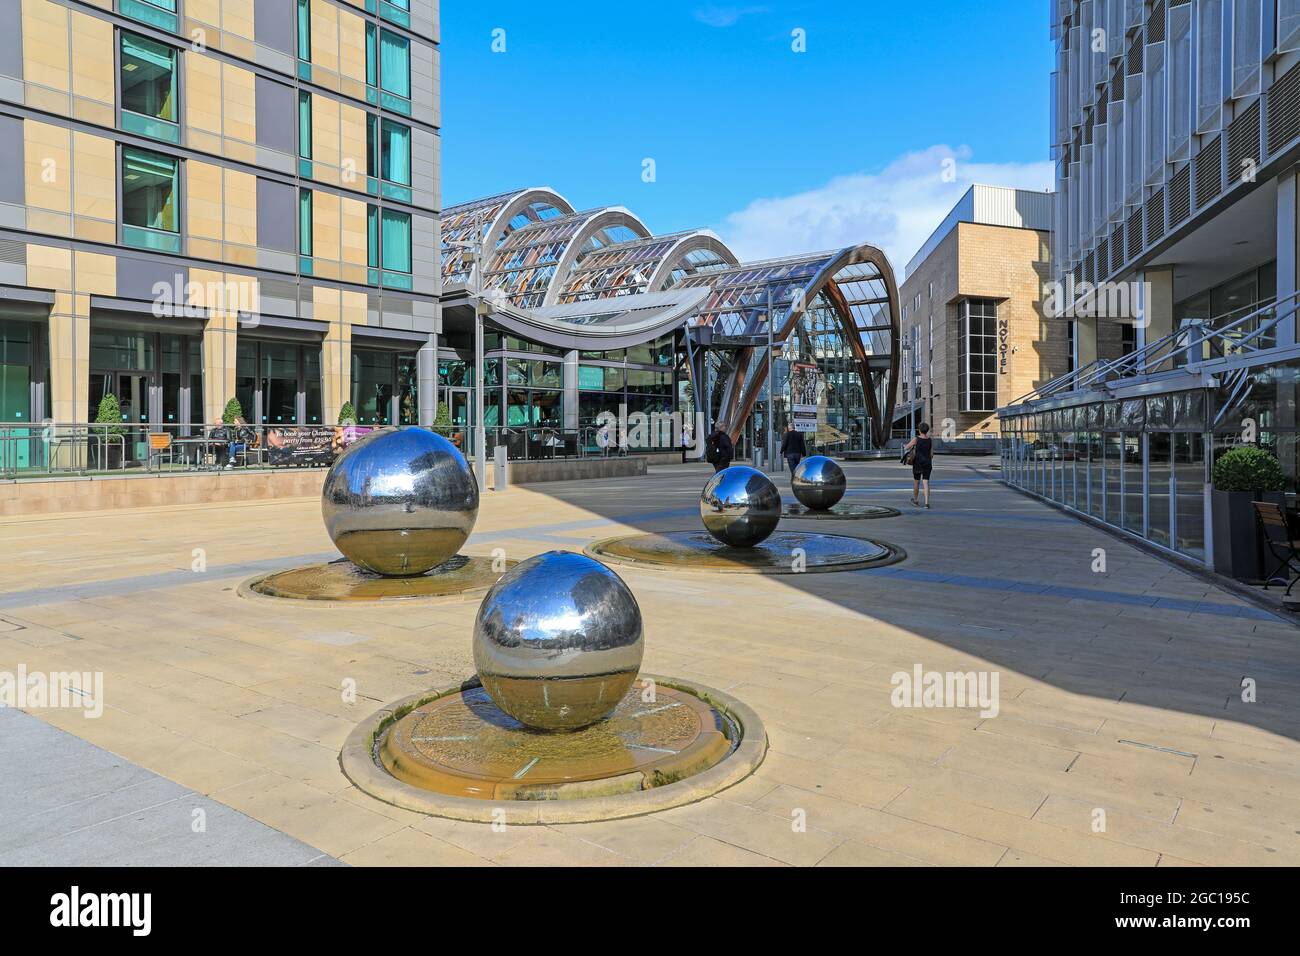 Winter Gardens et St Paul's Square, Sheffield, South Yorkshire, Angleterre, Royaume-Uni Banque D'Images